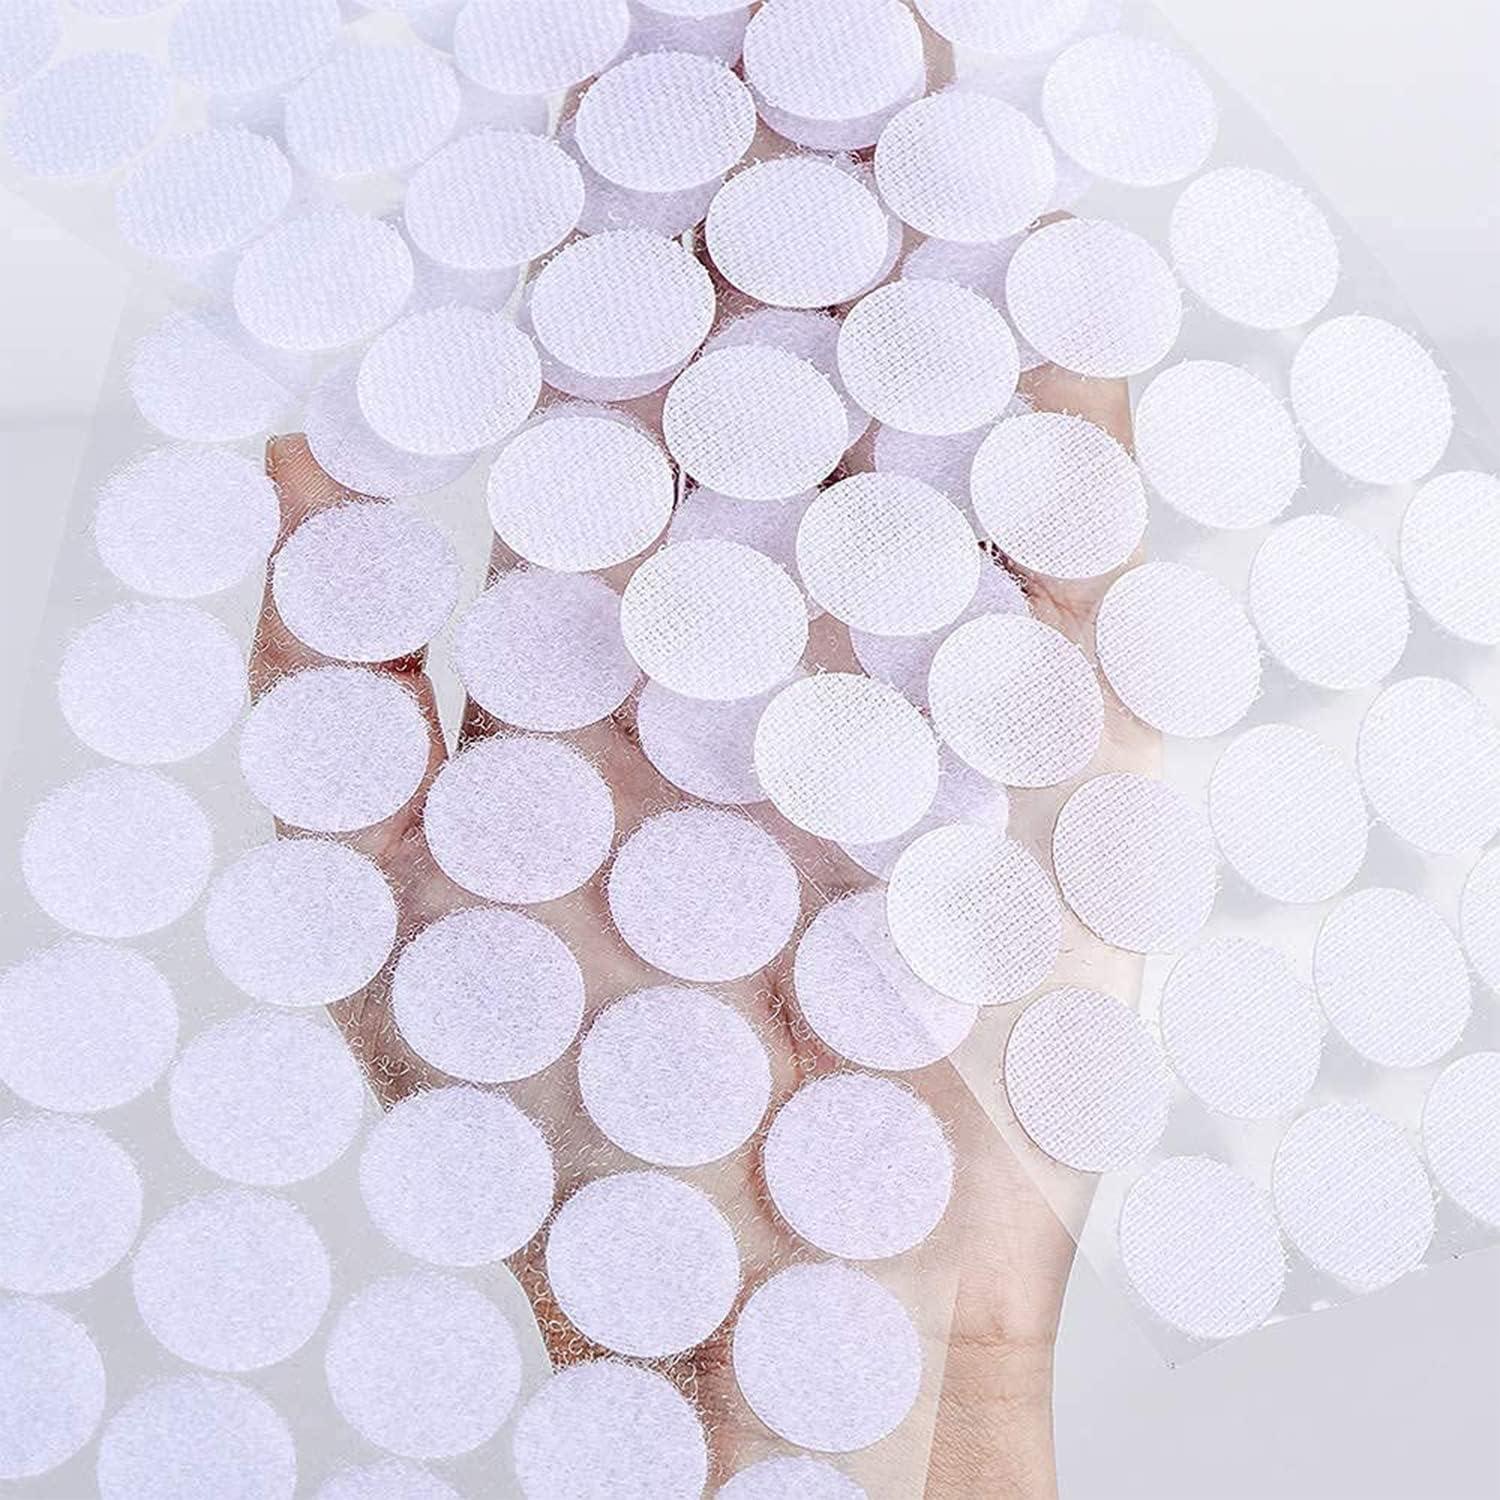 Self Adhesive Dots - 1200pcs (600 Pairs) 0.59 Diameter Waterproof Sticky  Back Hook Dot Loop Dot for School, Office, Home, Mounting Arts & Crafts